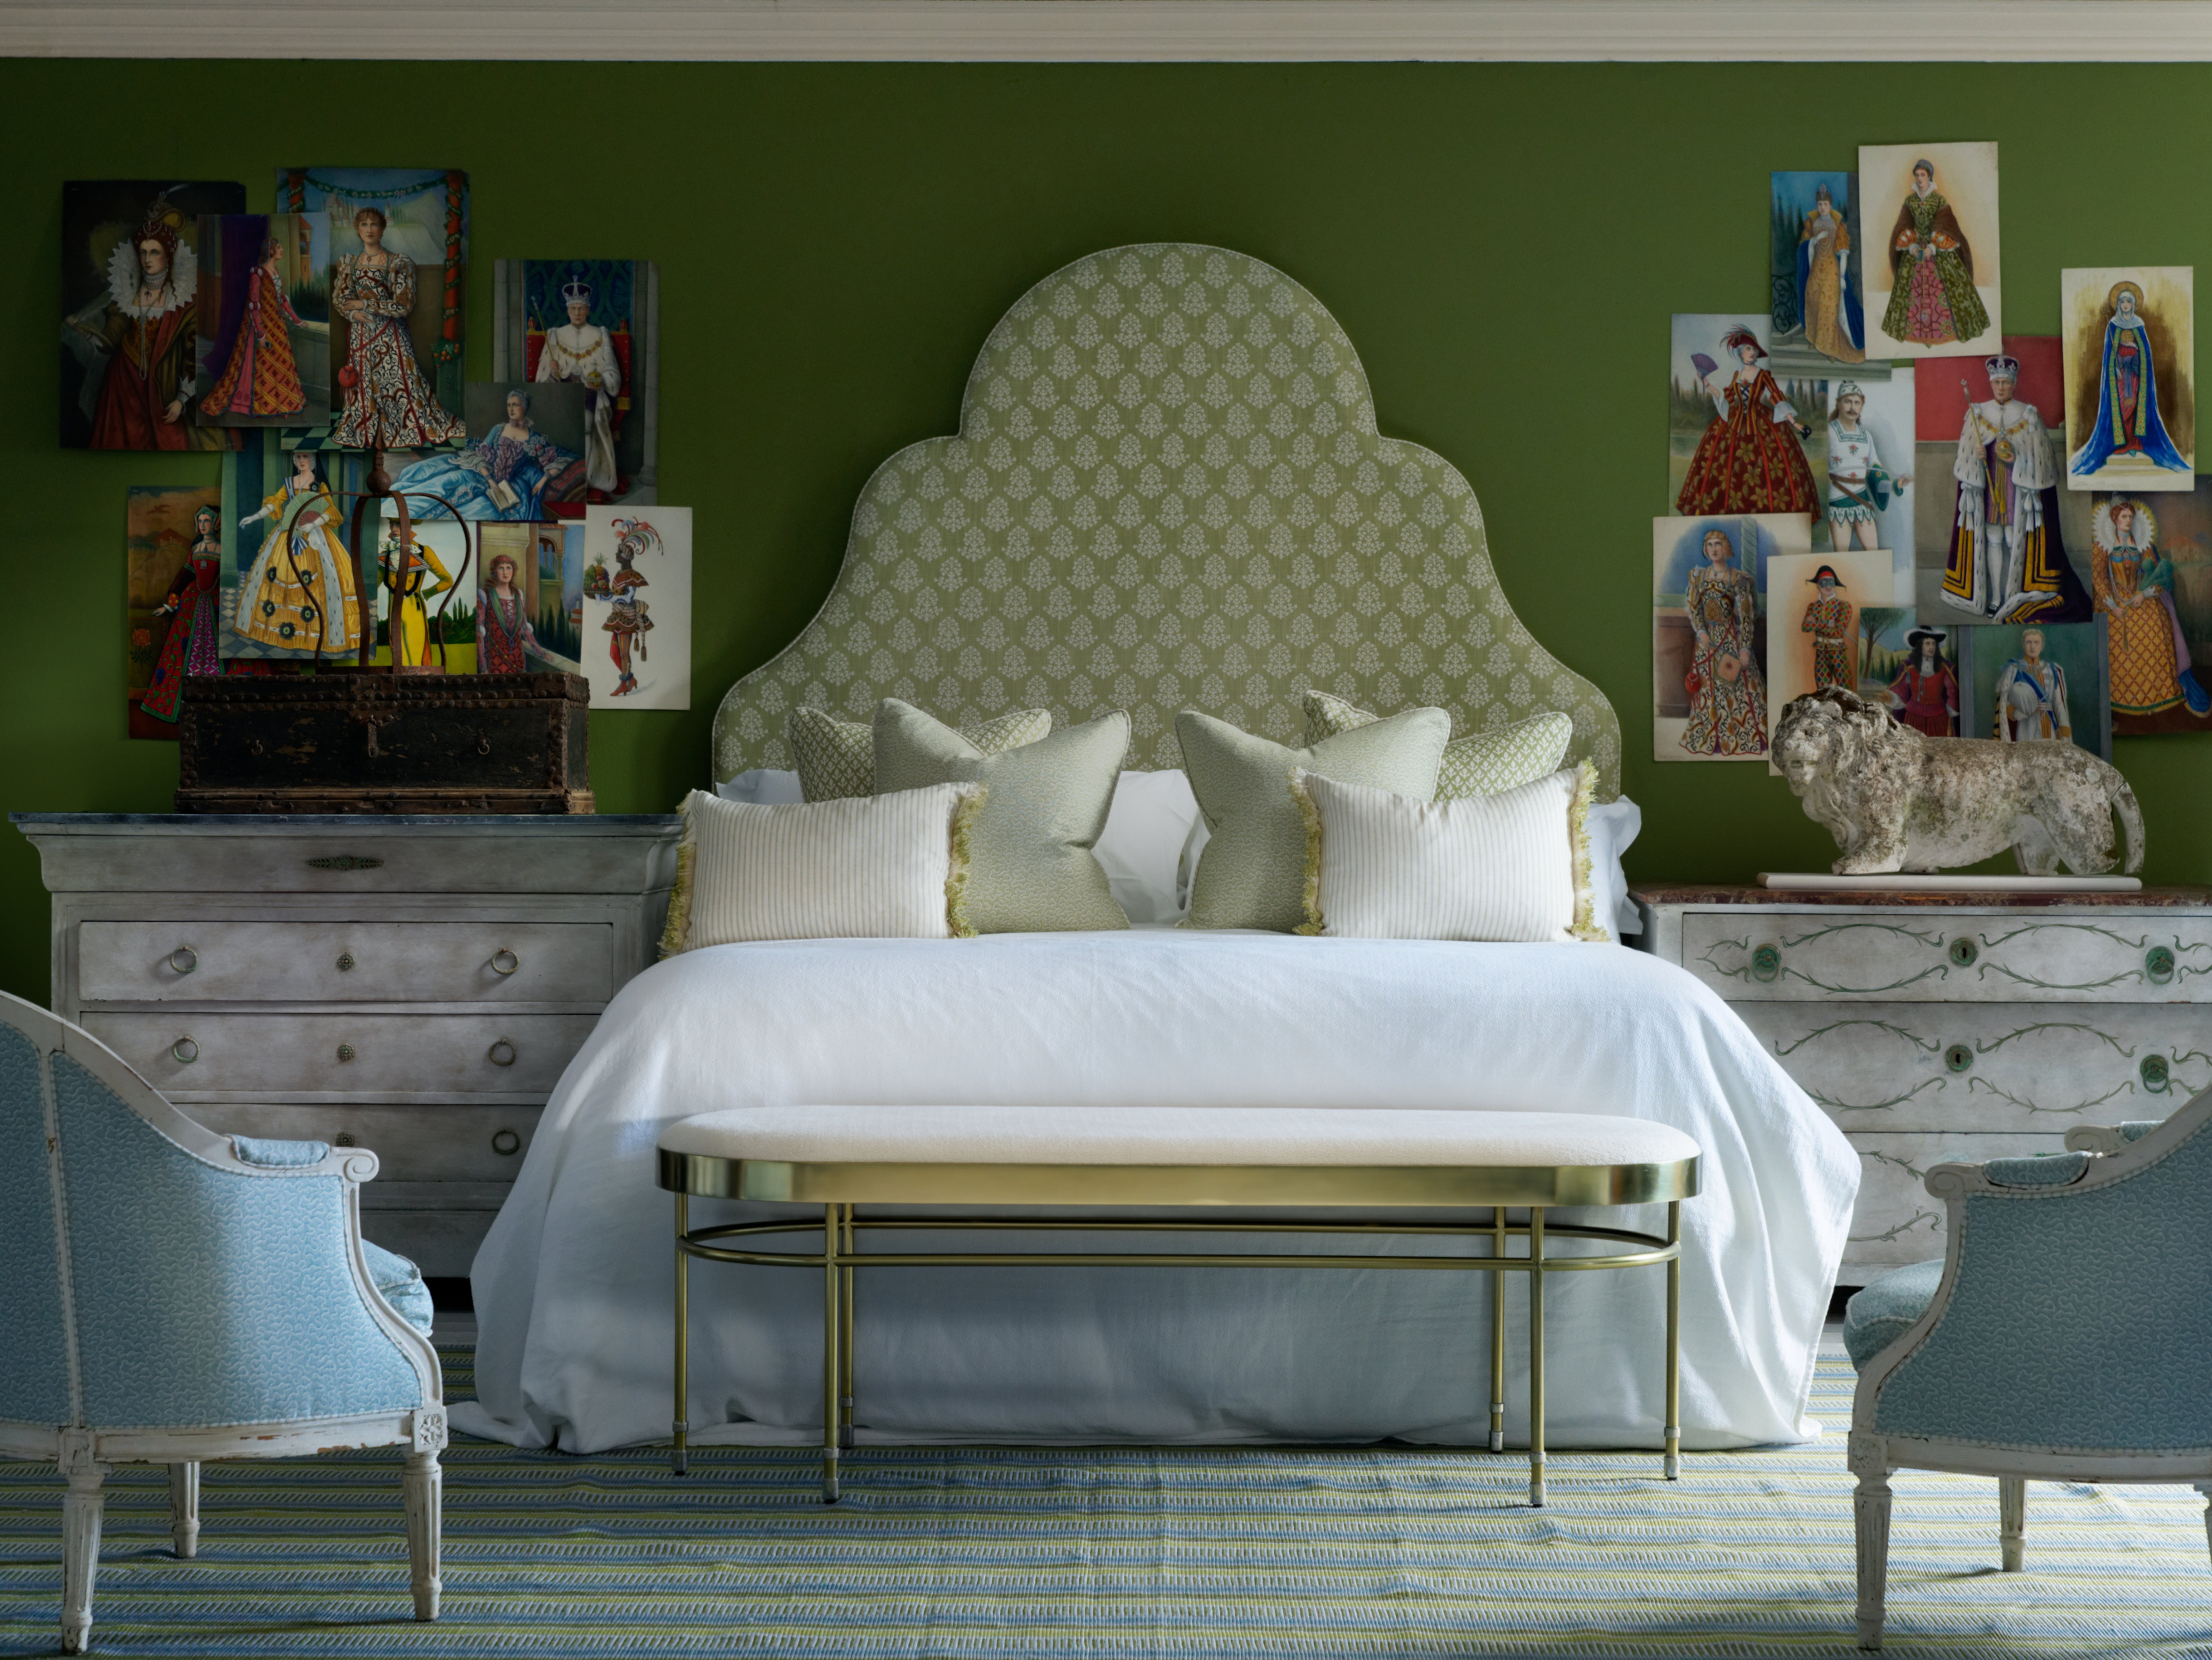 Green with envy: why wouldn’t you model your bedroom on a garden?